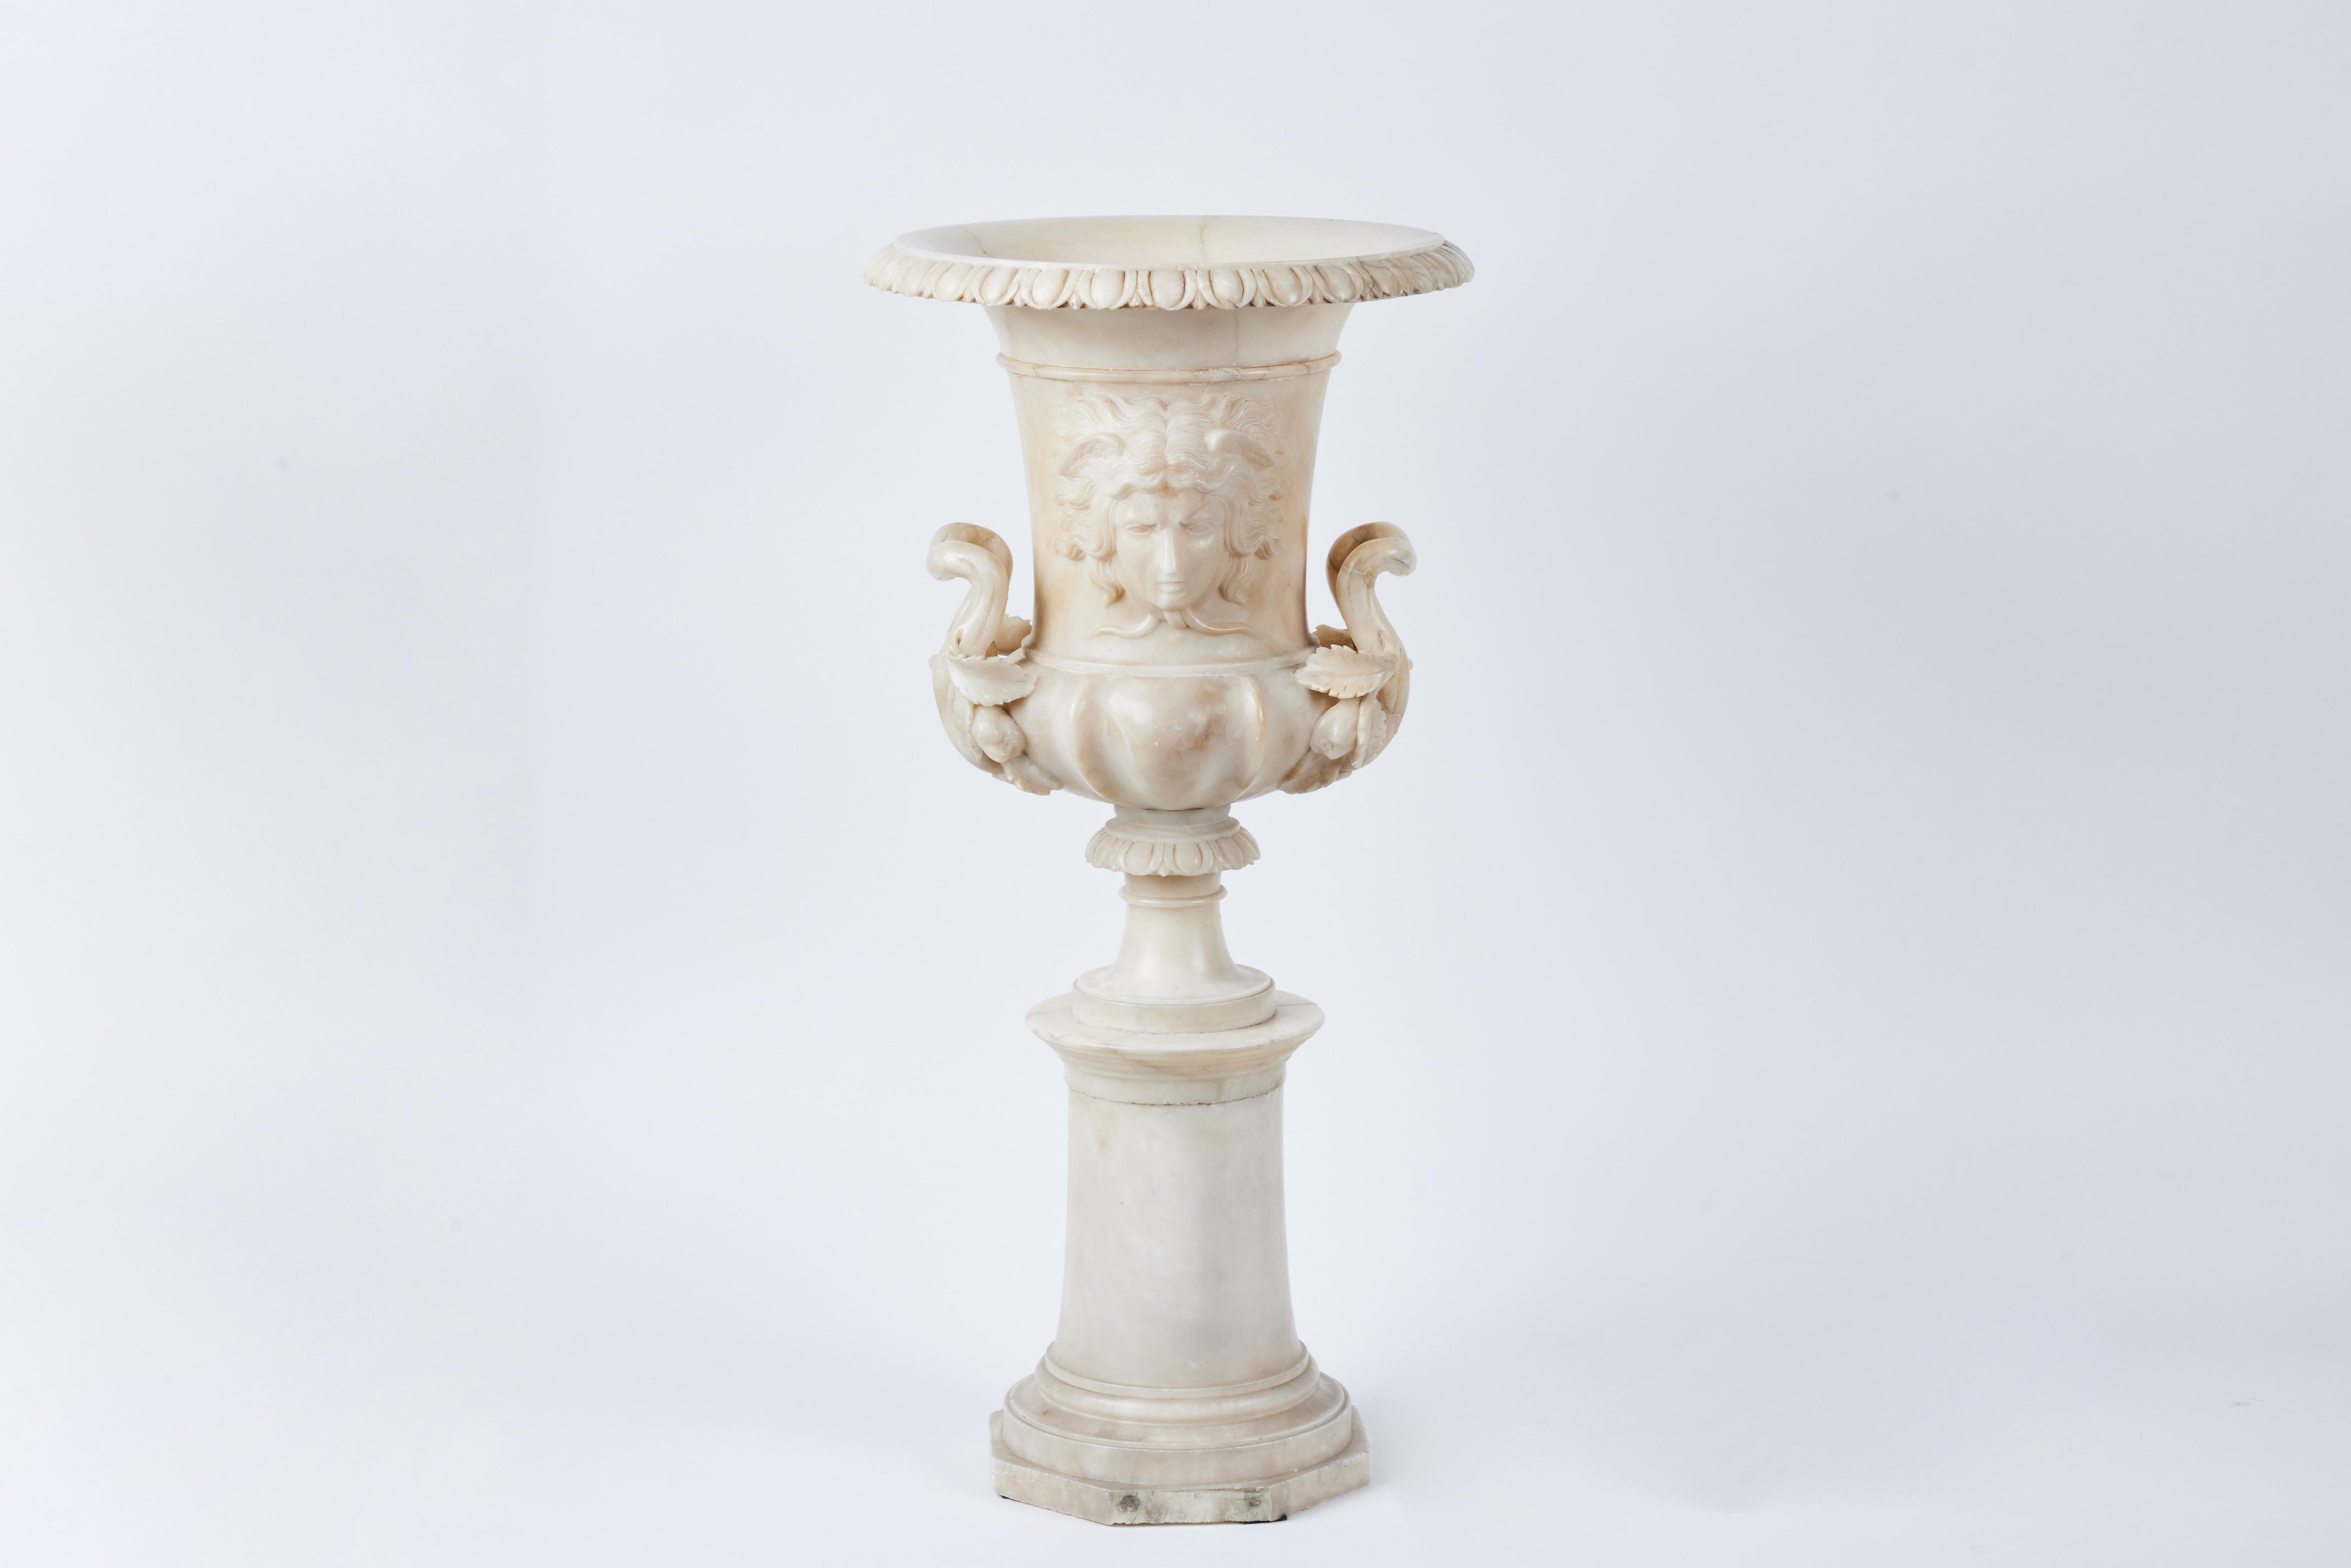 A striking pair of hand carved alabaster urns featuring the face of Mercury, sinuous foliate arms, rims of acanthus leaves, on a stepped base.  